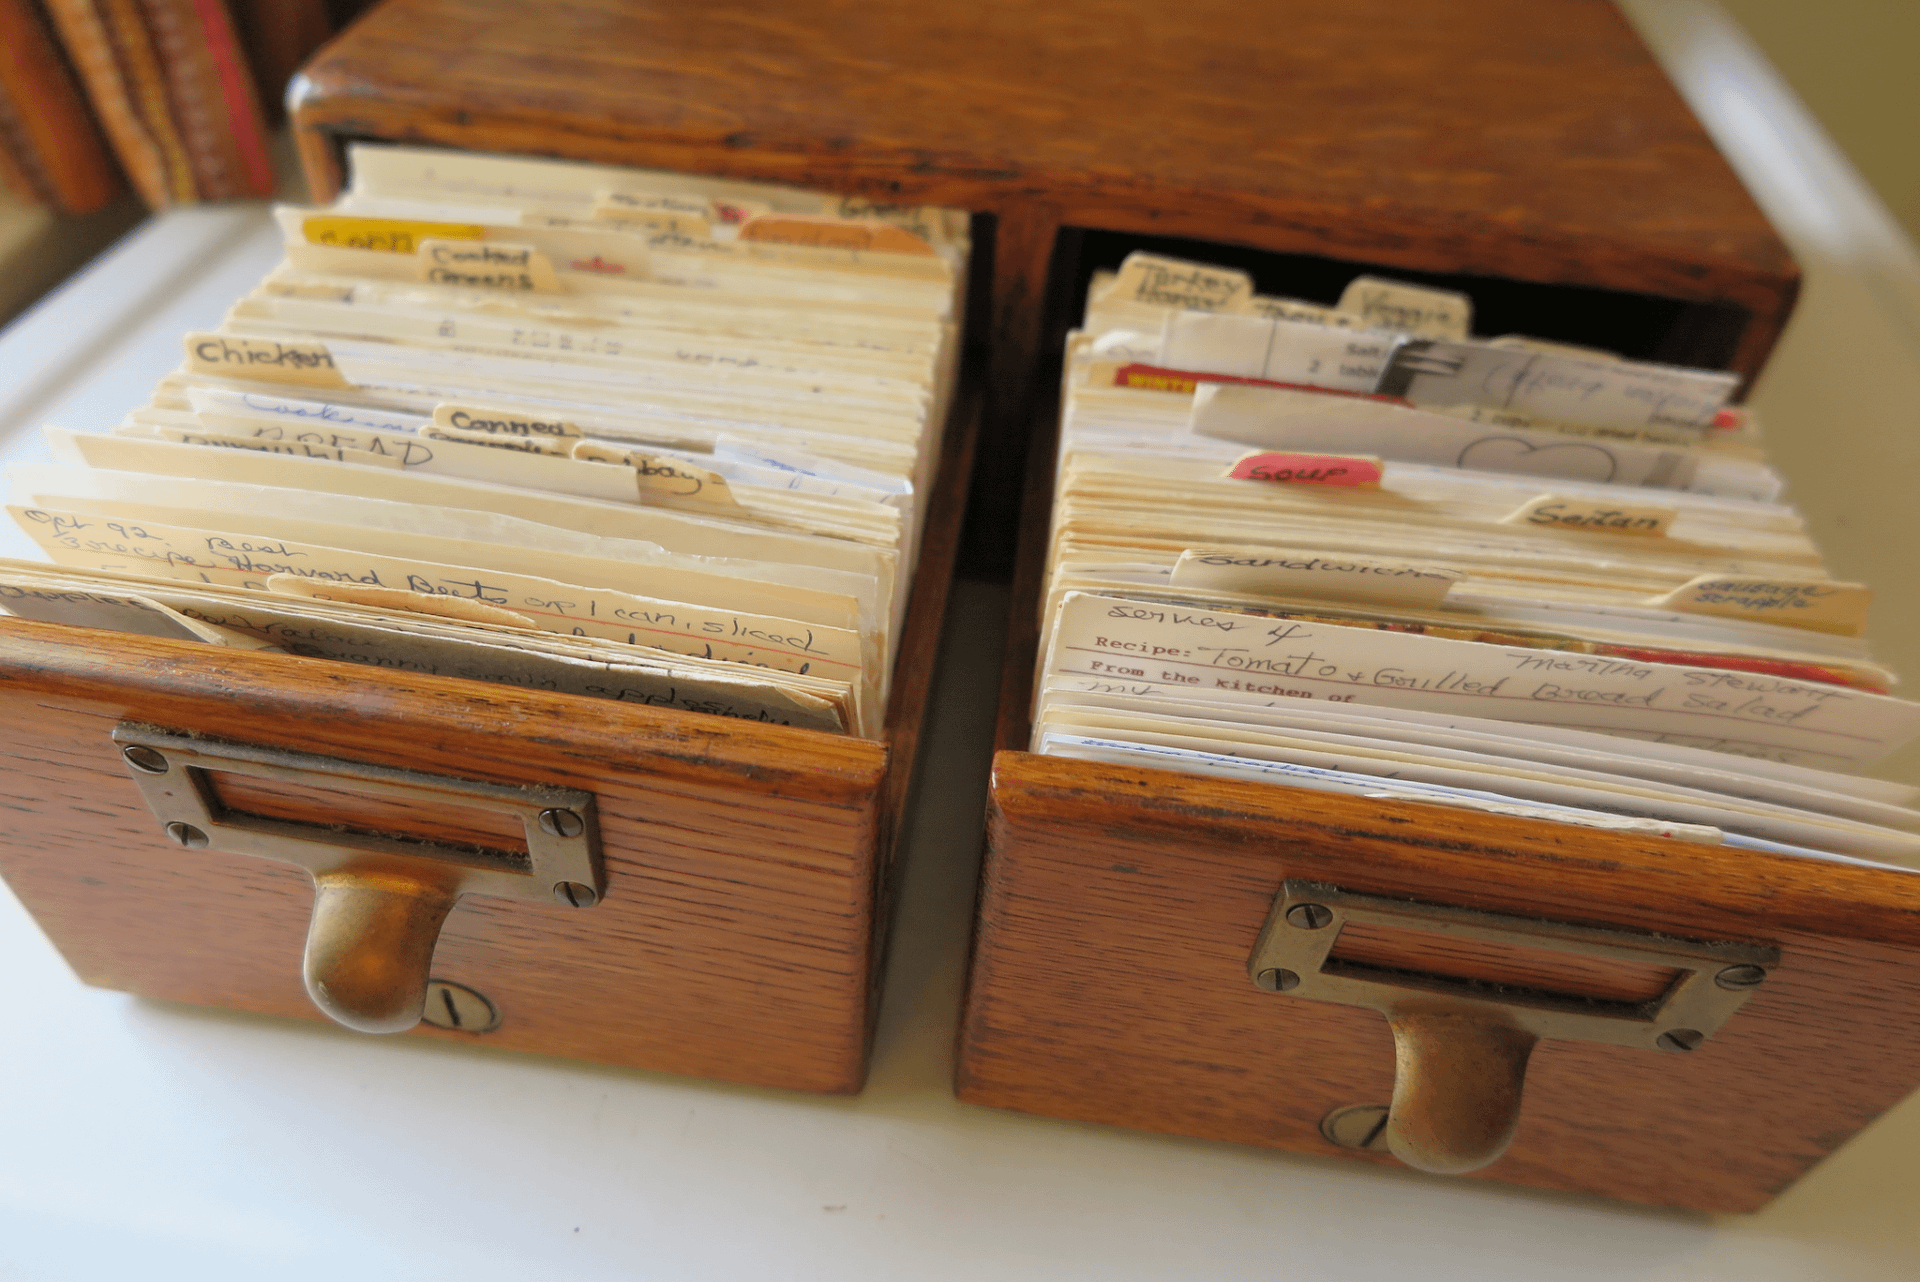 A library file card style recipe box with tow drawers, both opened to show the many recipe cards inside